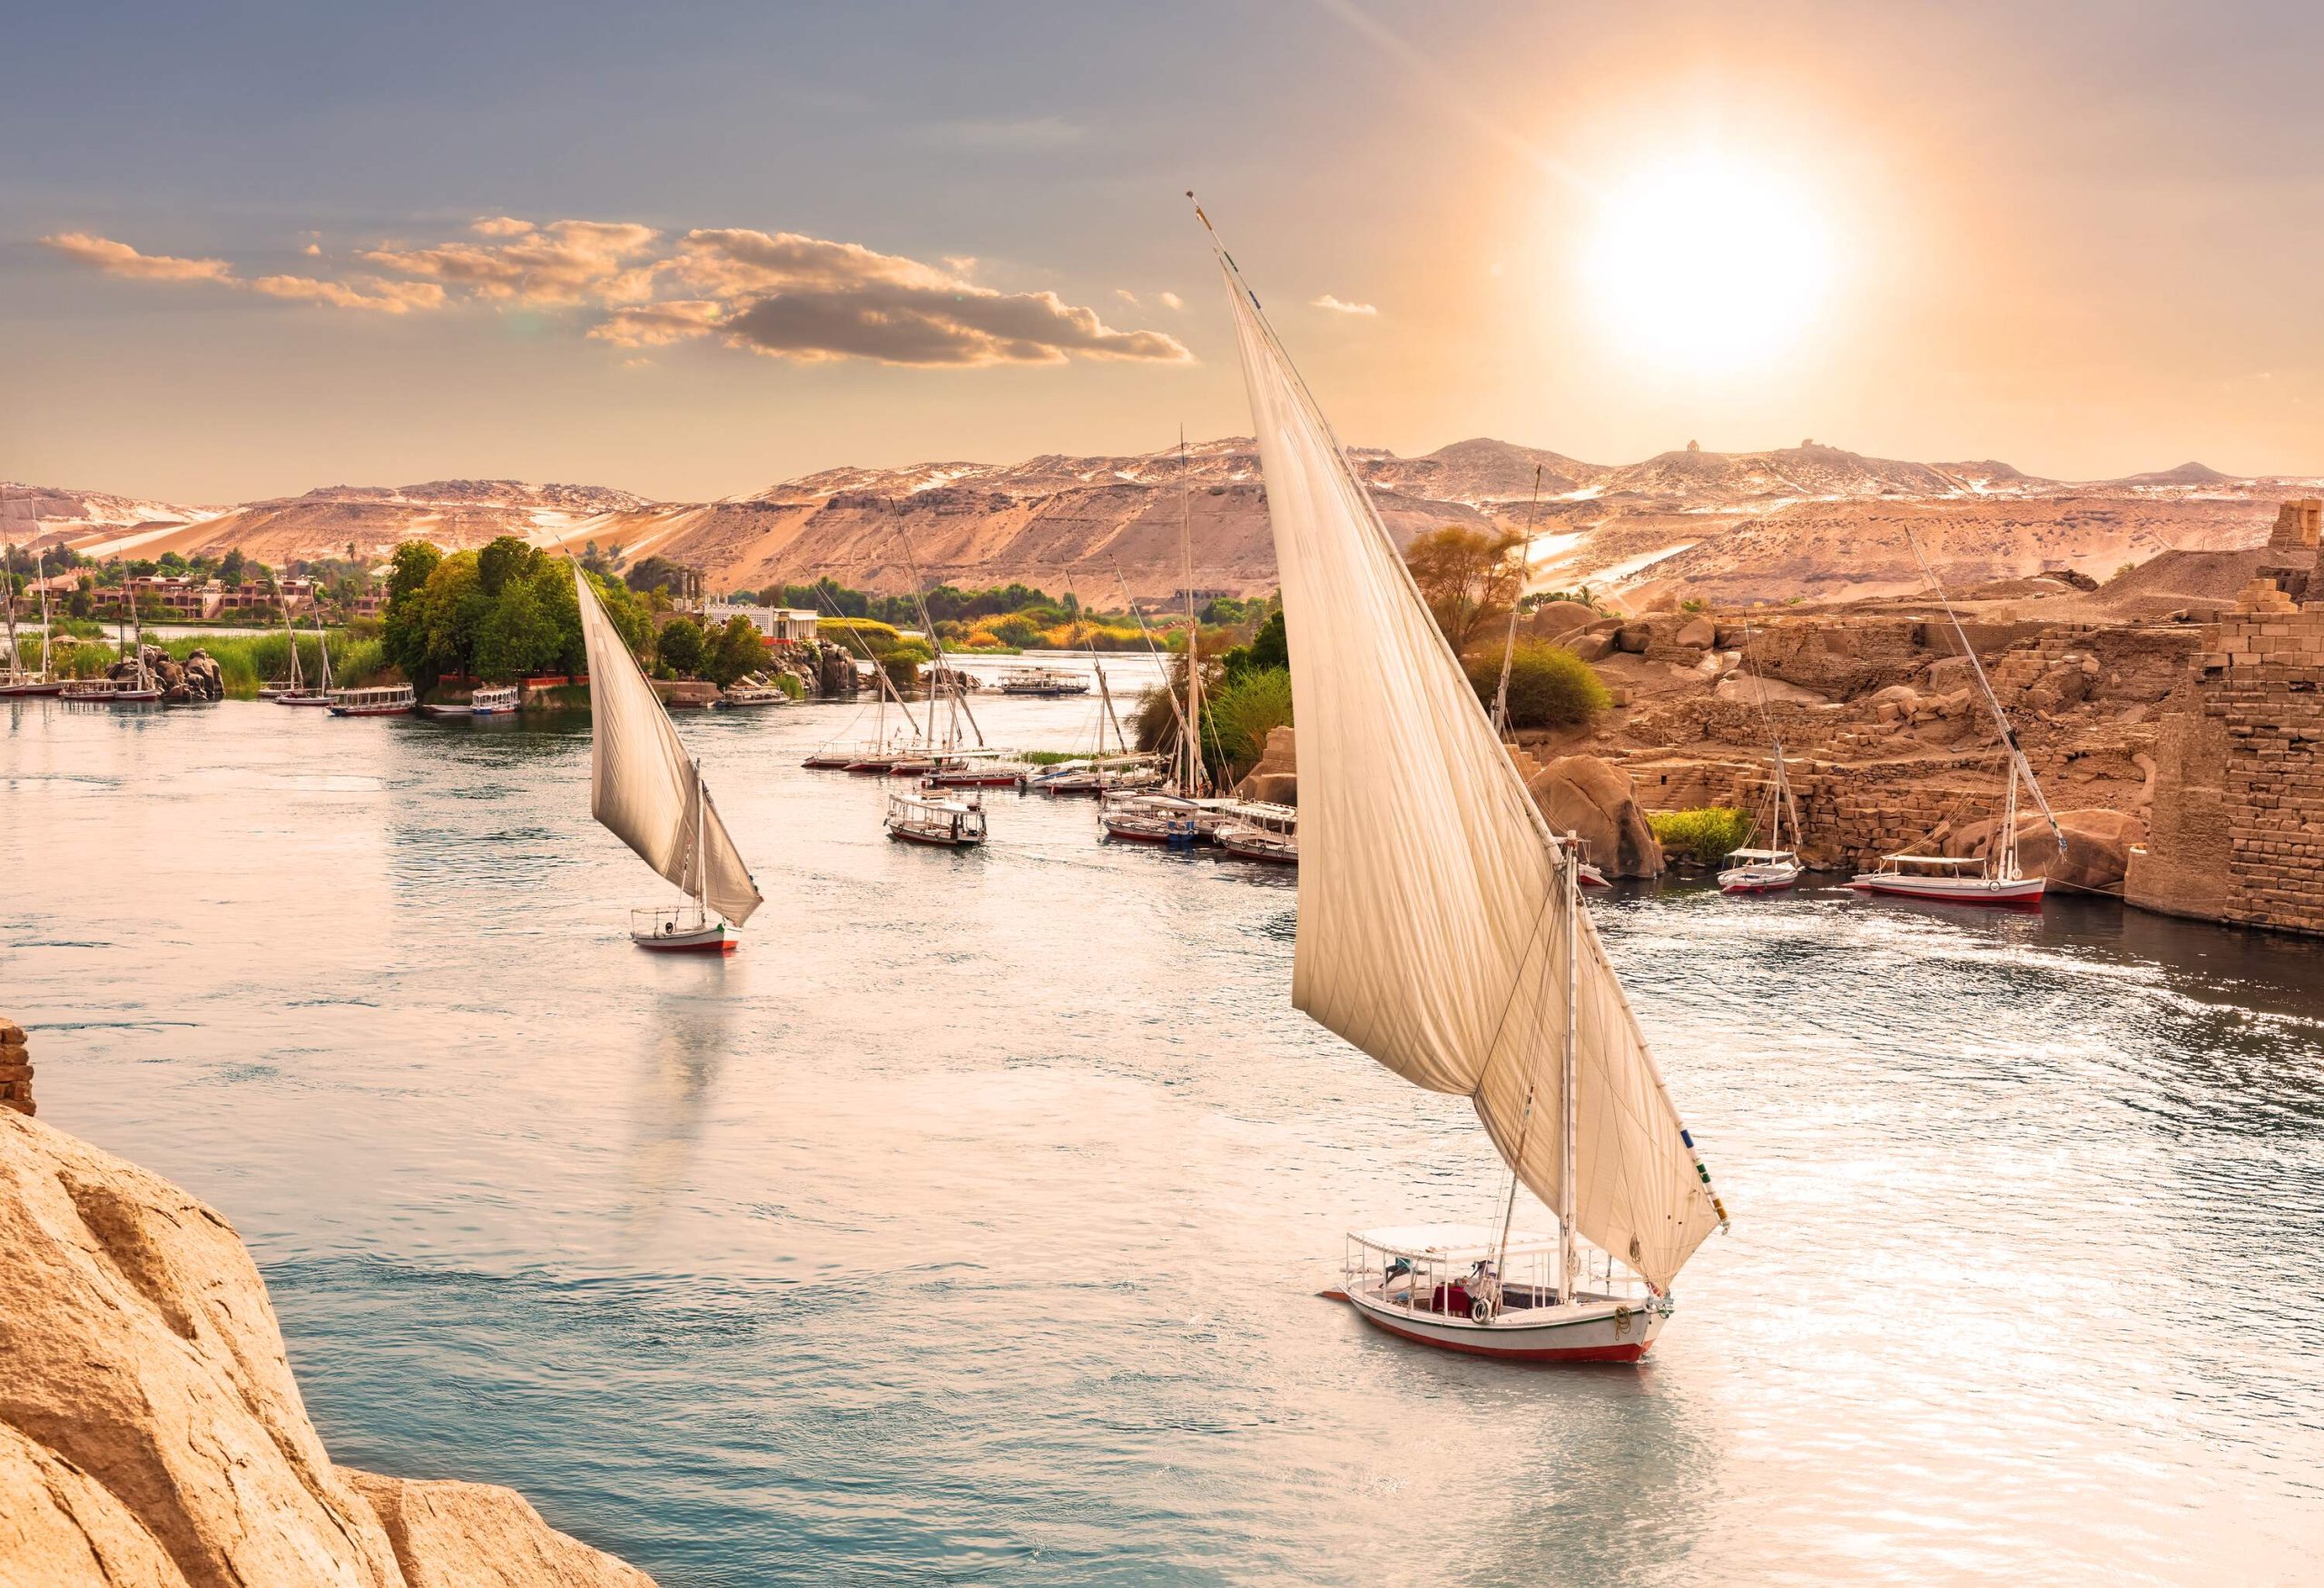 dest_egypt_river-nile_aswan_gettyimages-1327507461_universal_within-usage-period_87916